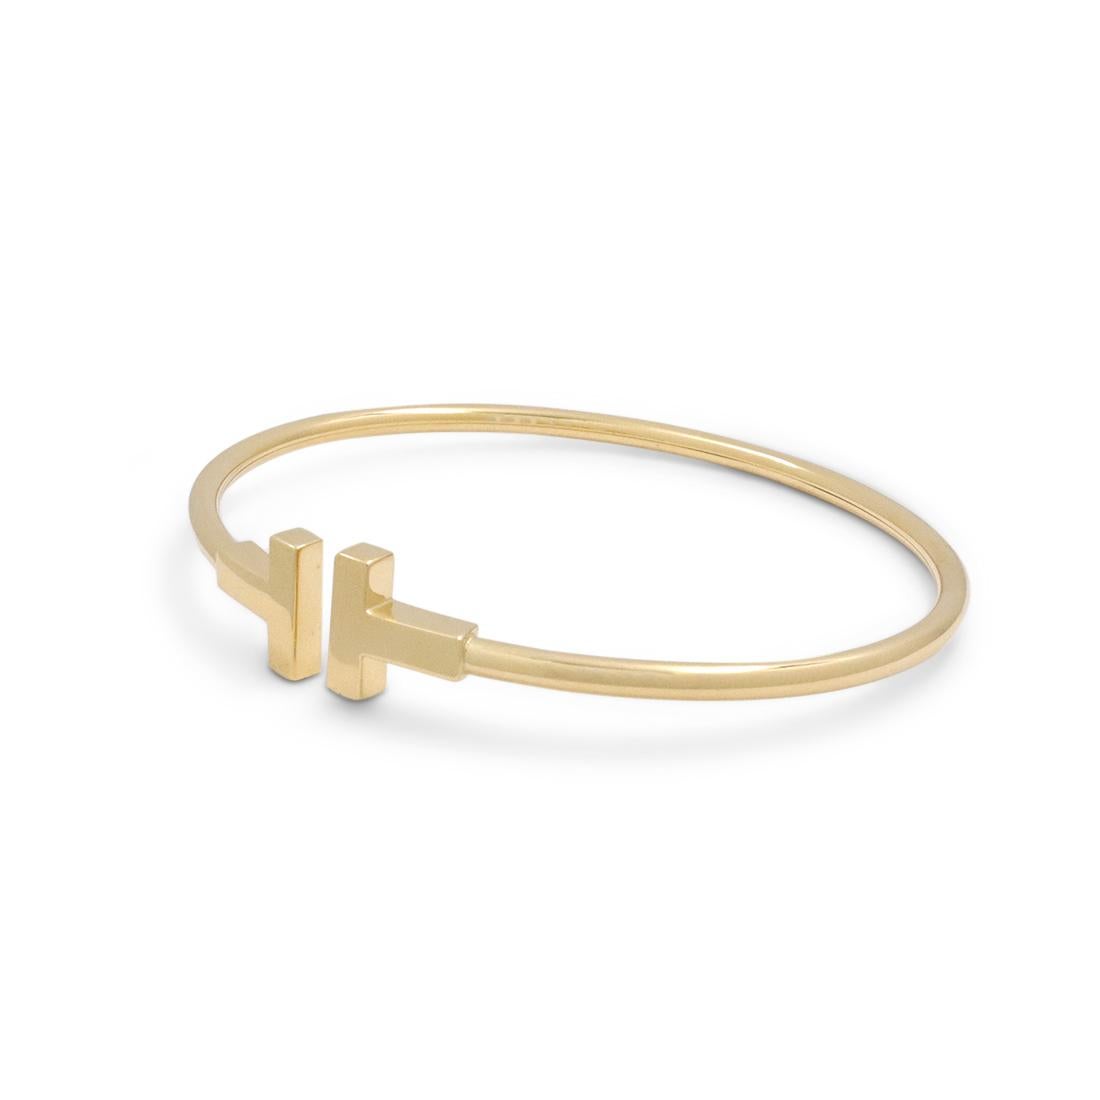 Authentic Tiffany & Co. 'Tiffany T' wire bracelet crafted in 18 karat yellow gold. Signed T&Co., Au750. Will fit up to 6.25 inch wrist. The bracelet is not presented with the original box or papers. CIRCA 2010s.

Brand: Tiffany & Co.
Collection: